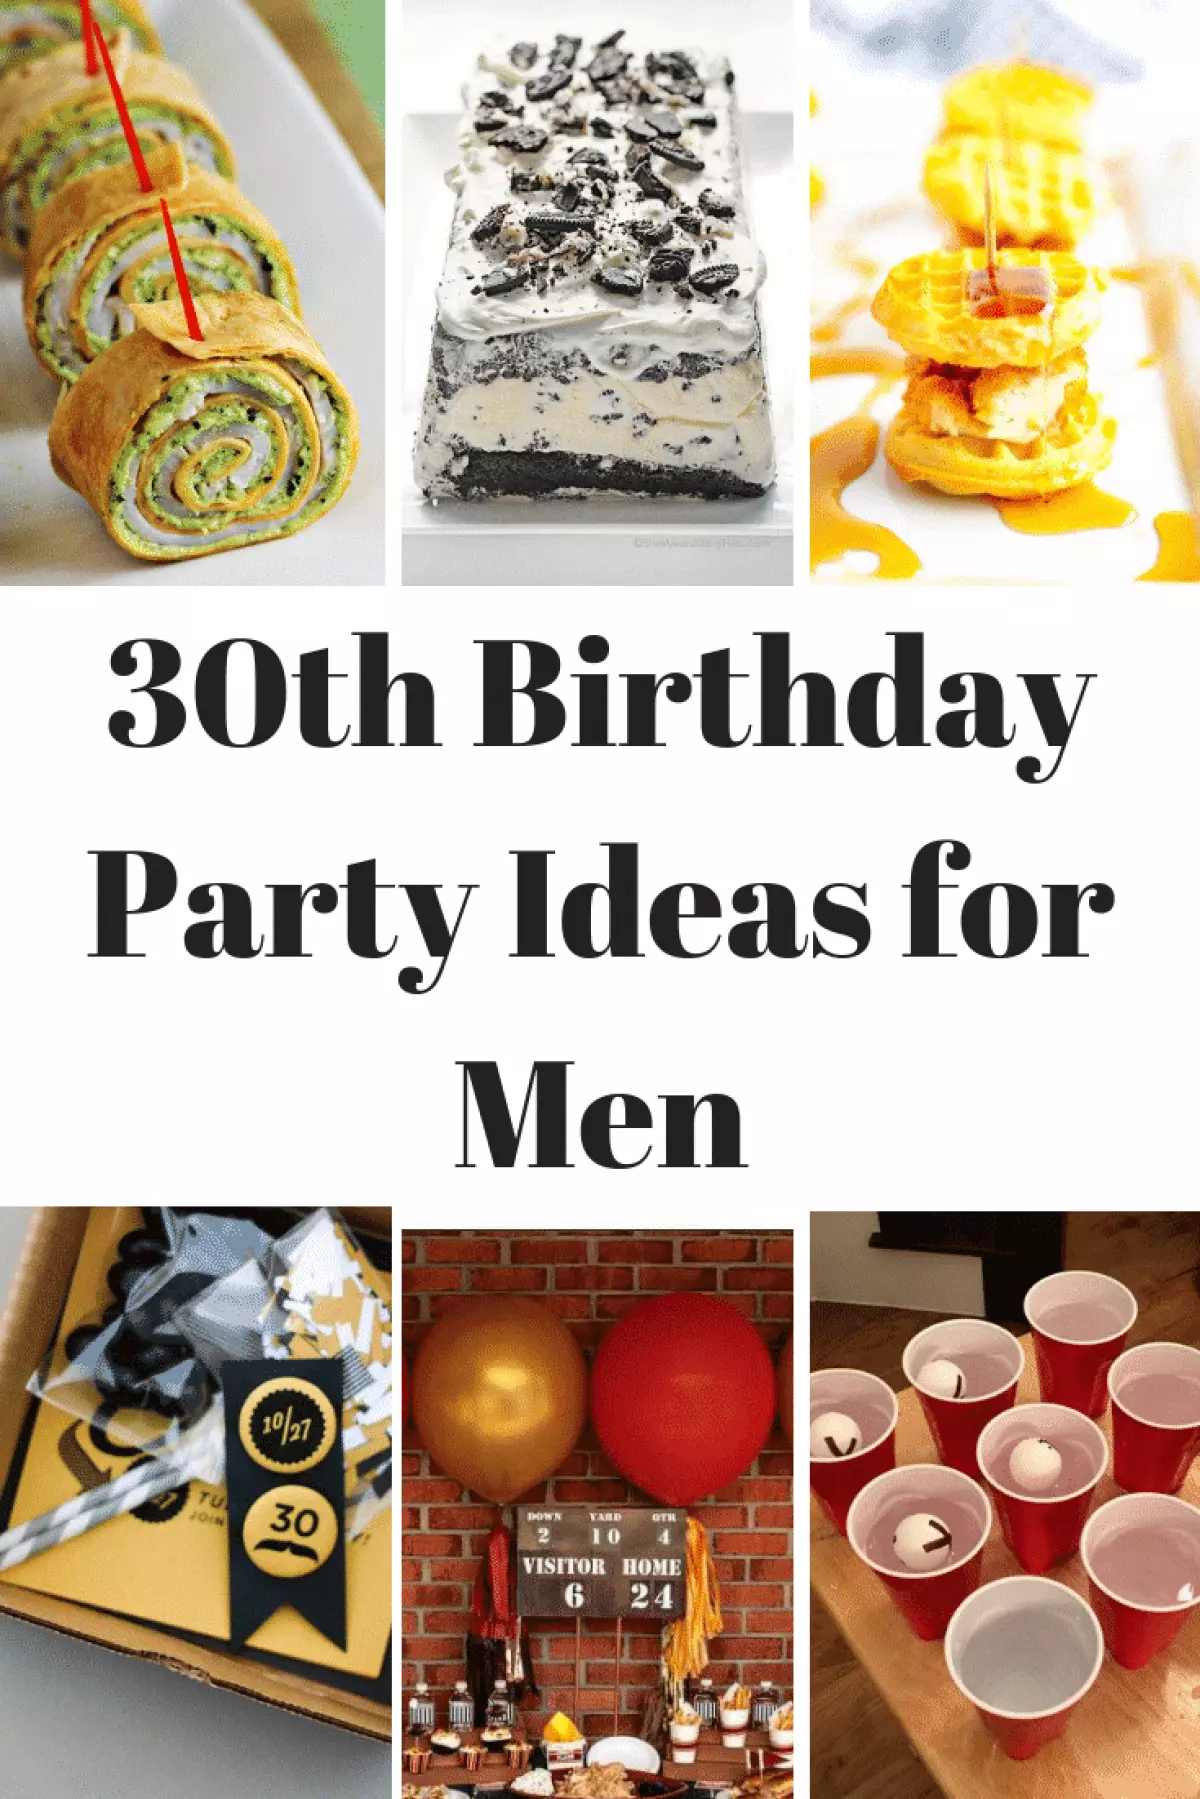 This list of 30th birthday party ideas for men is so helpful!